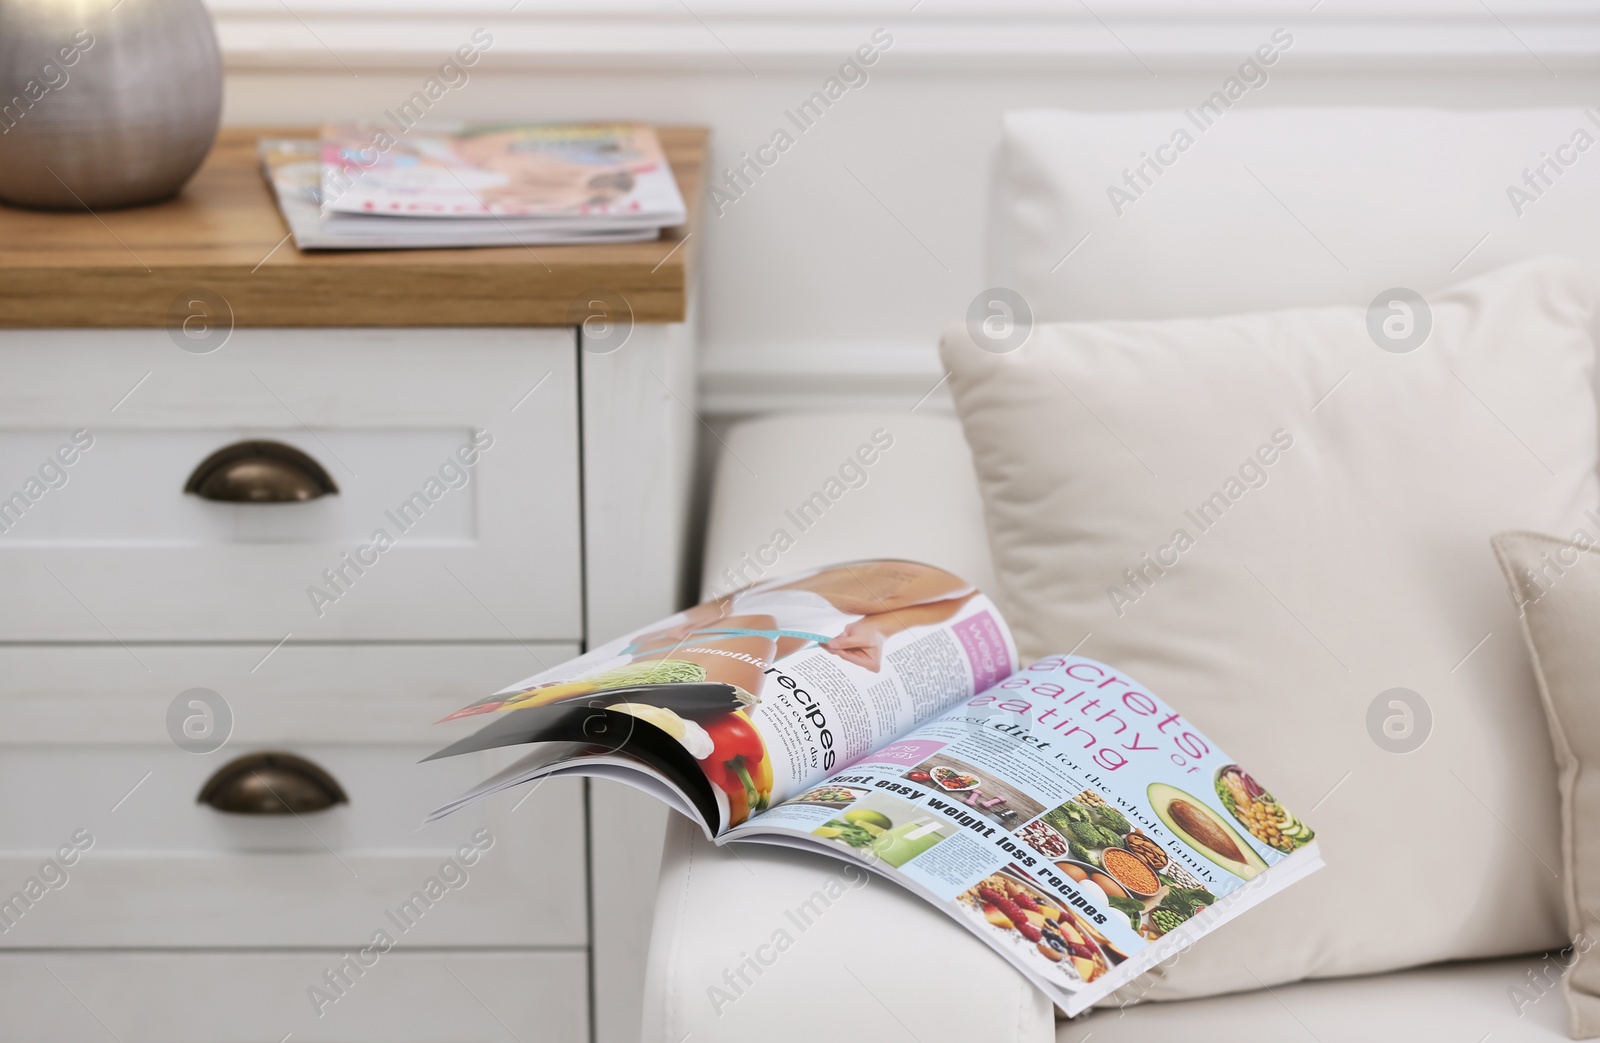 Photo of Culinary magazine on sofa in living room